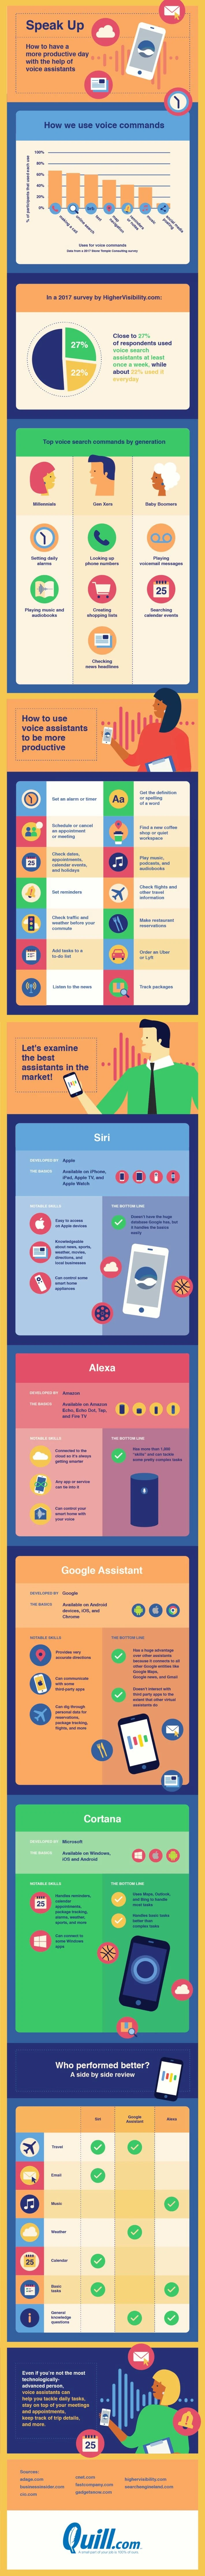 Speak Up: Have a More Productive Day With The Help Of Voice Assistants - #infographic